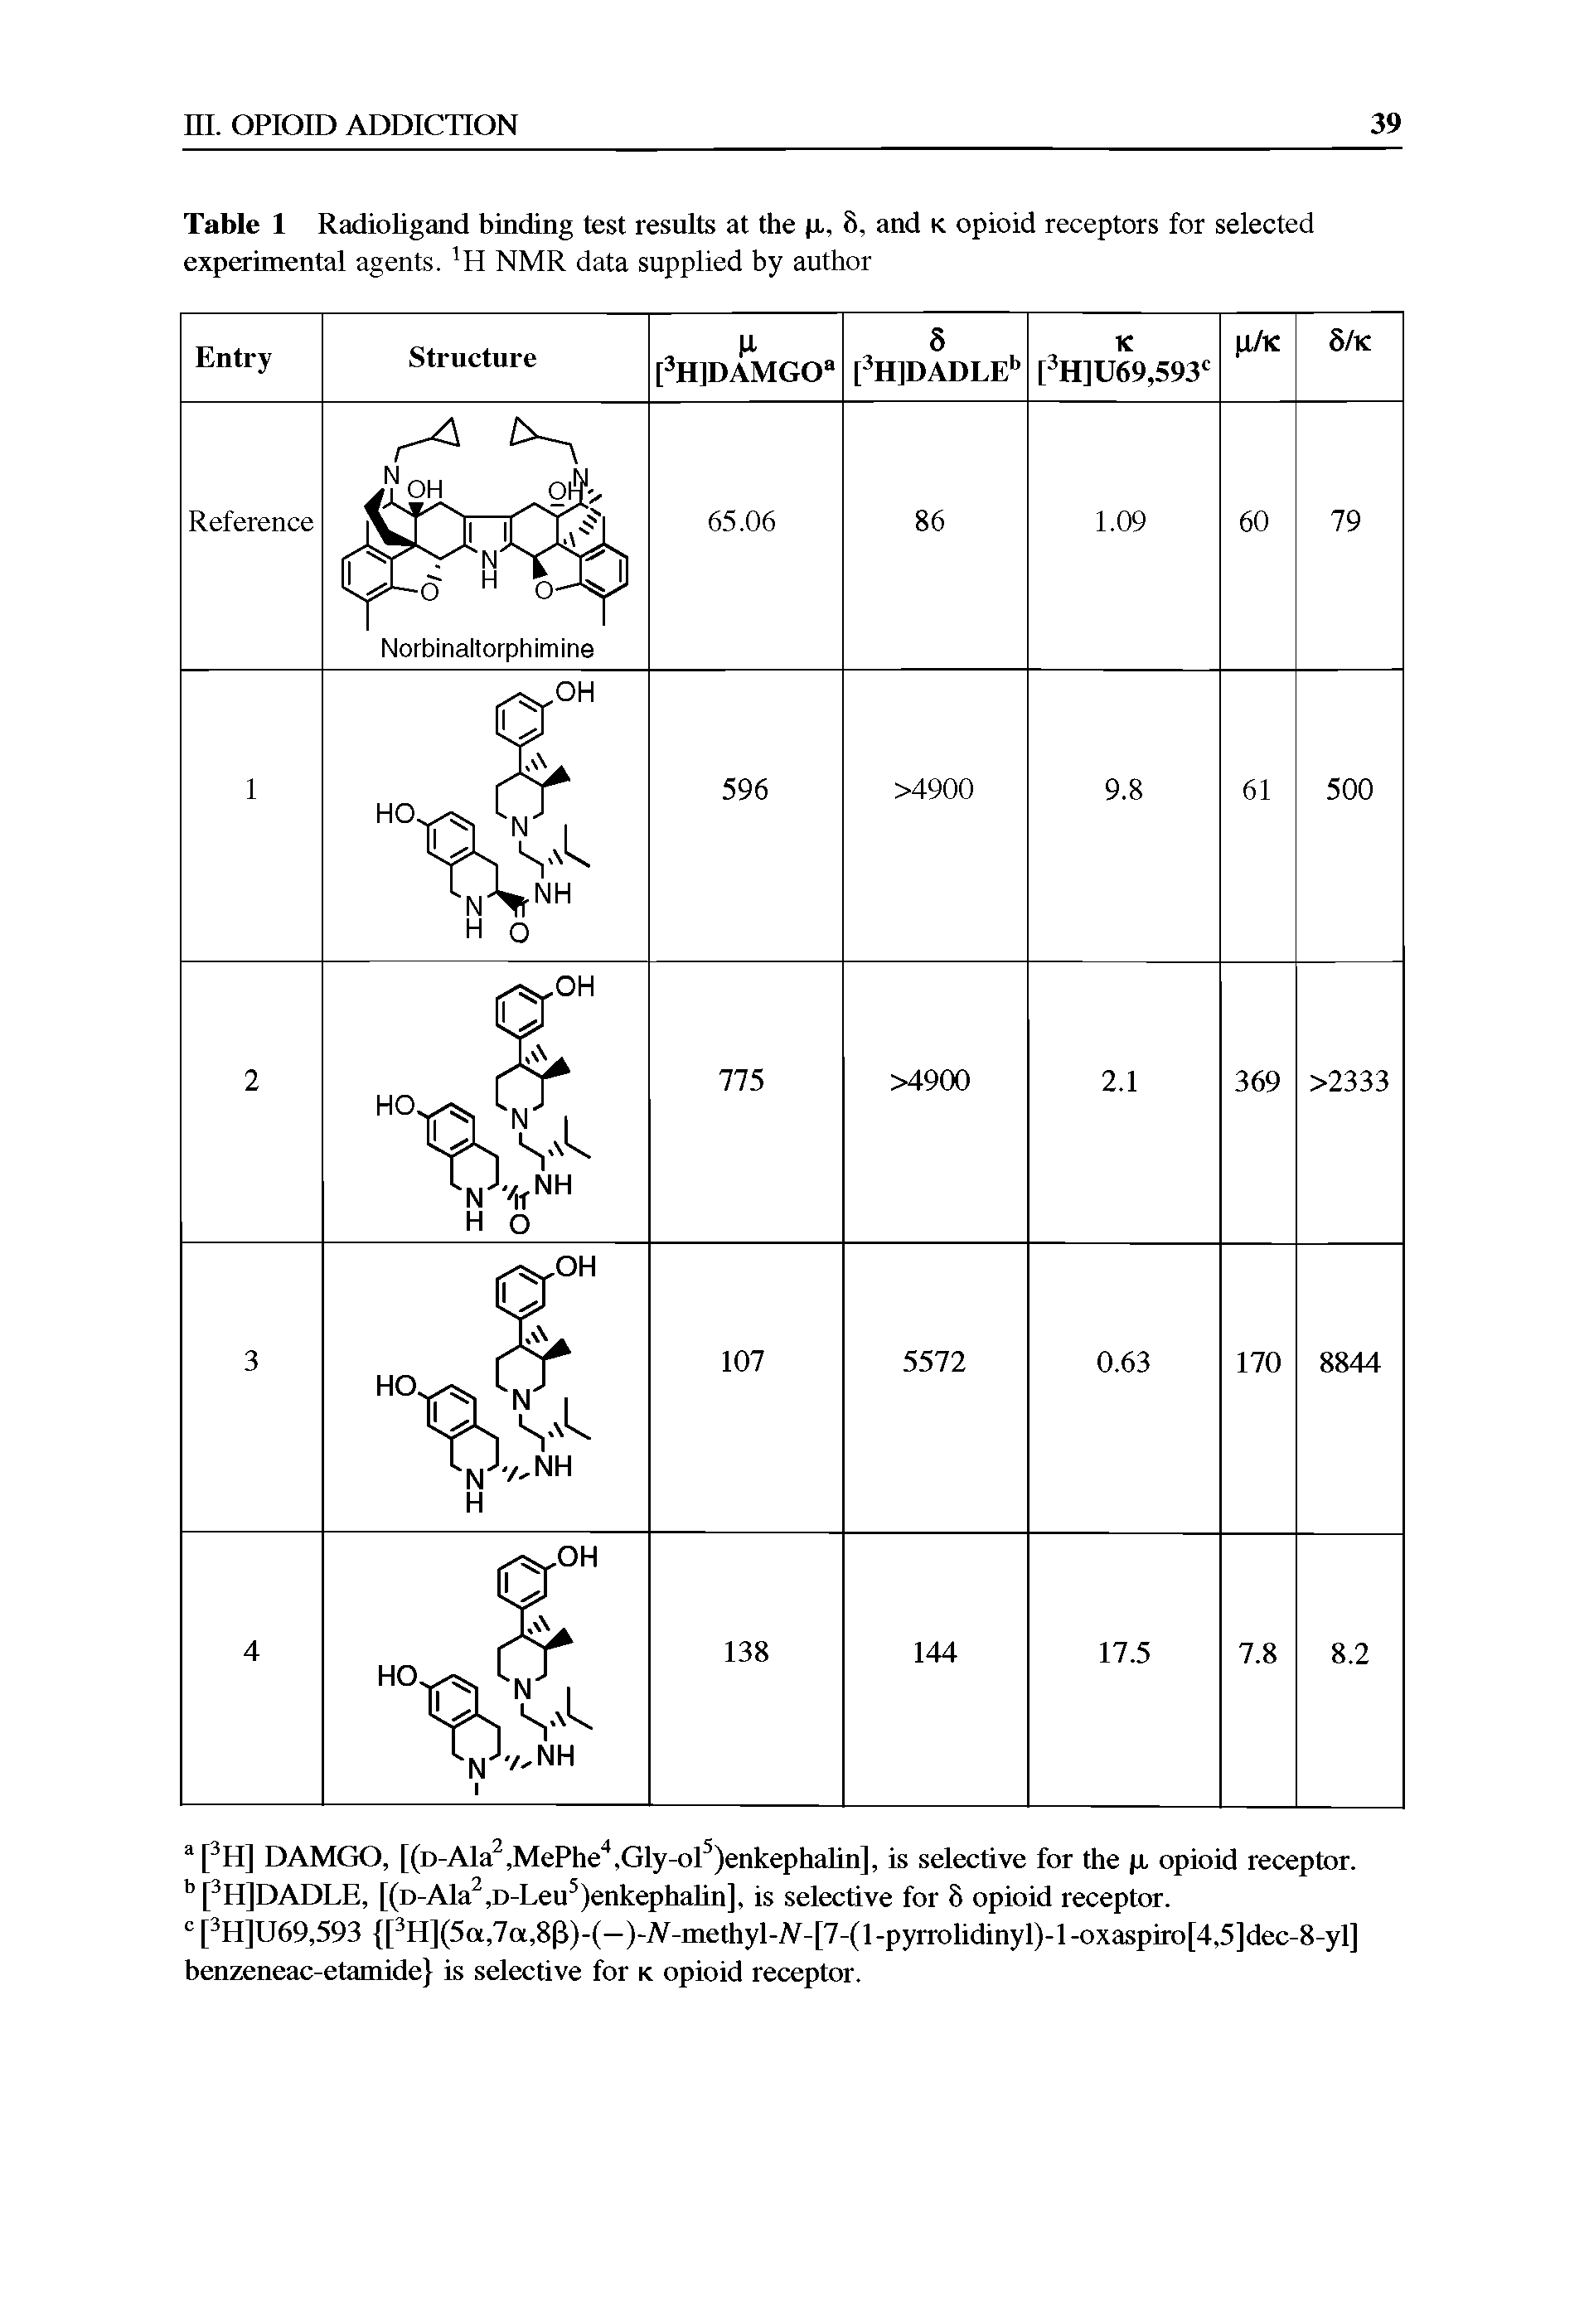 Table 1 Radioligand binding test results at the p, 8, and k opioid receptors for selected experimental agents. H NMR data supplied by author...